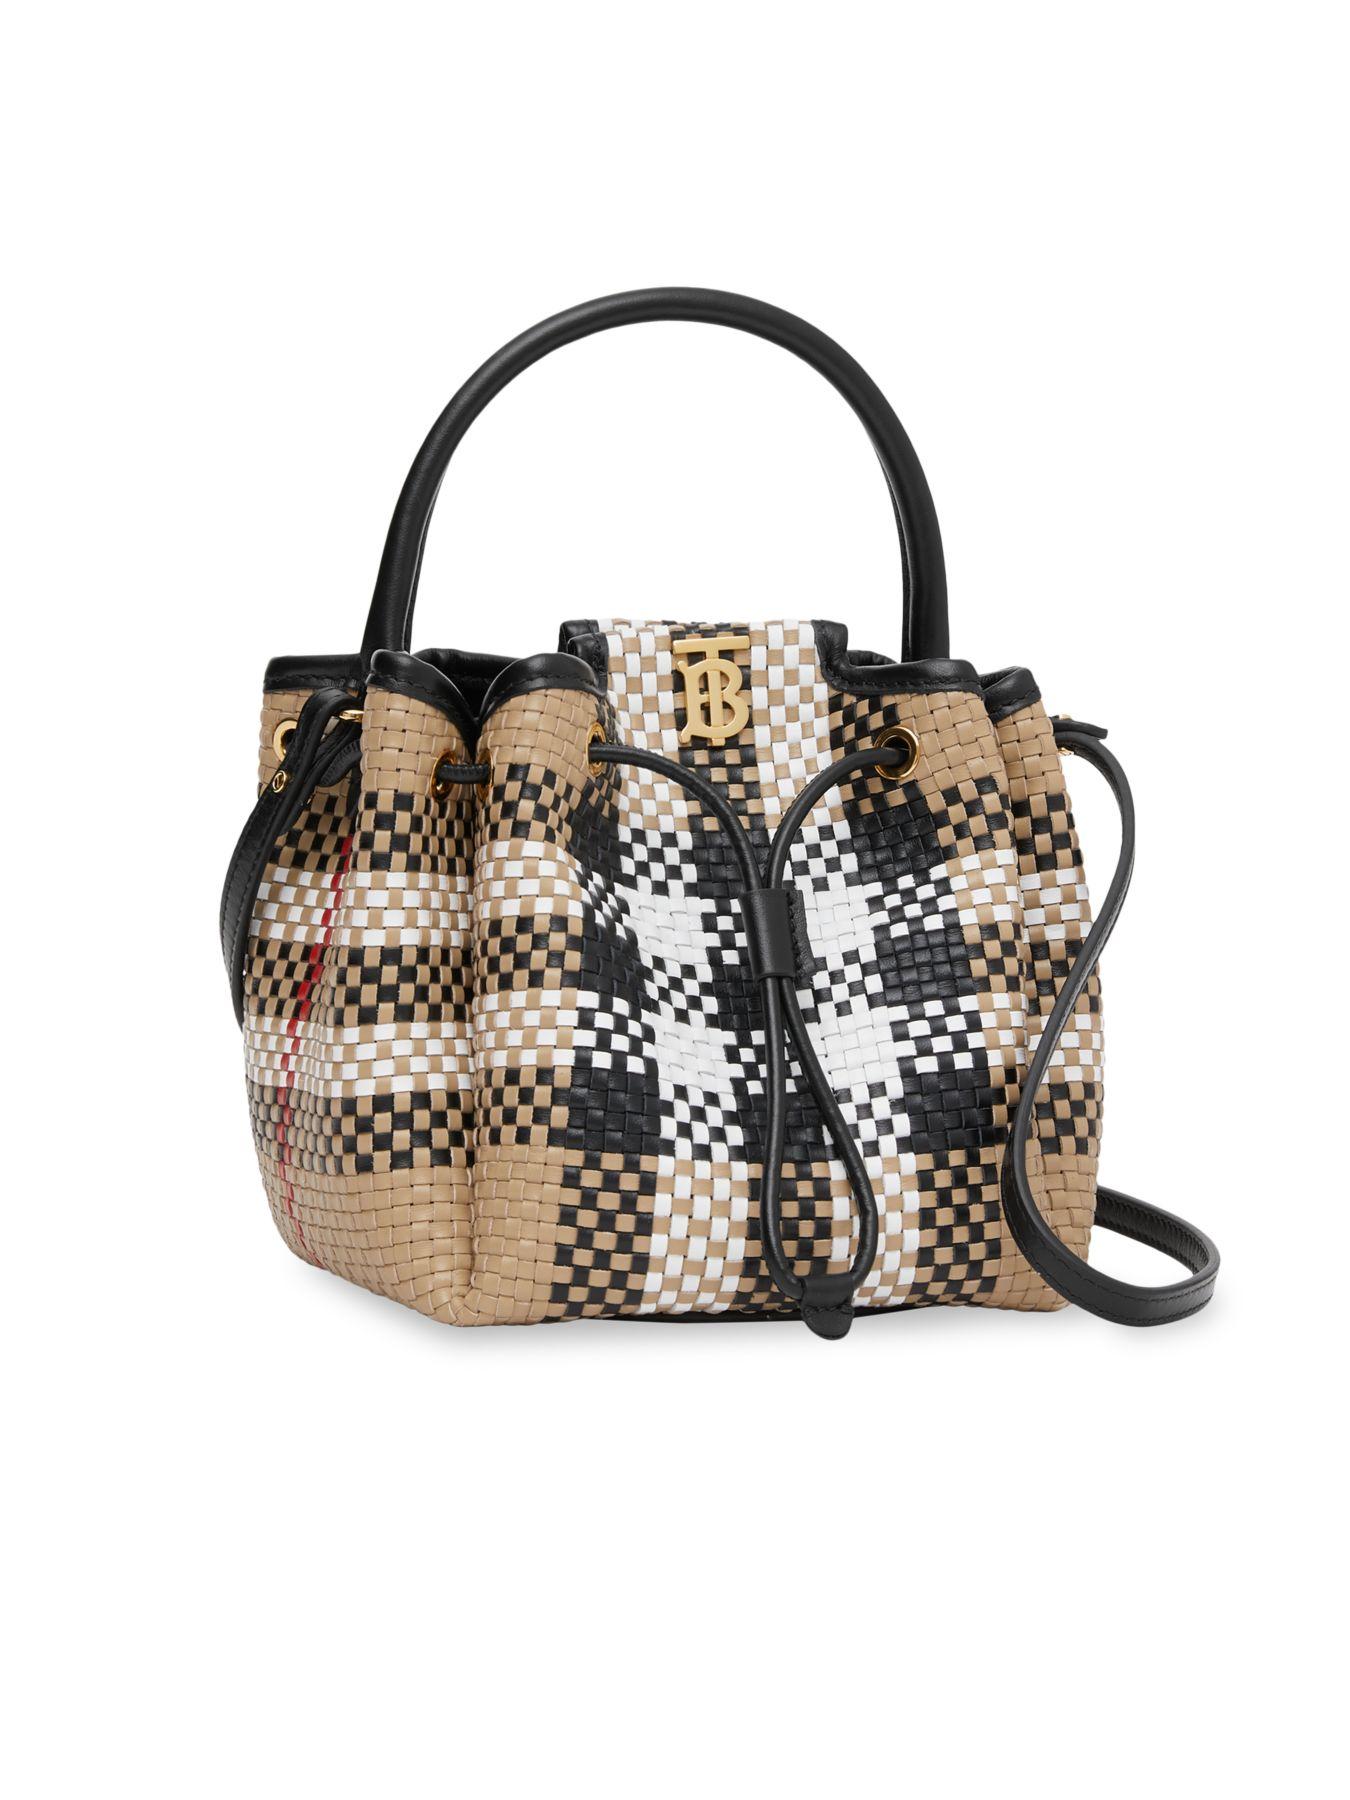 Burberry Peony Vintage Check Woven Leather Bucket Bag in Beige (Natural) -  Lyst